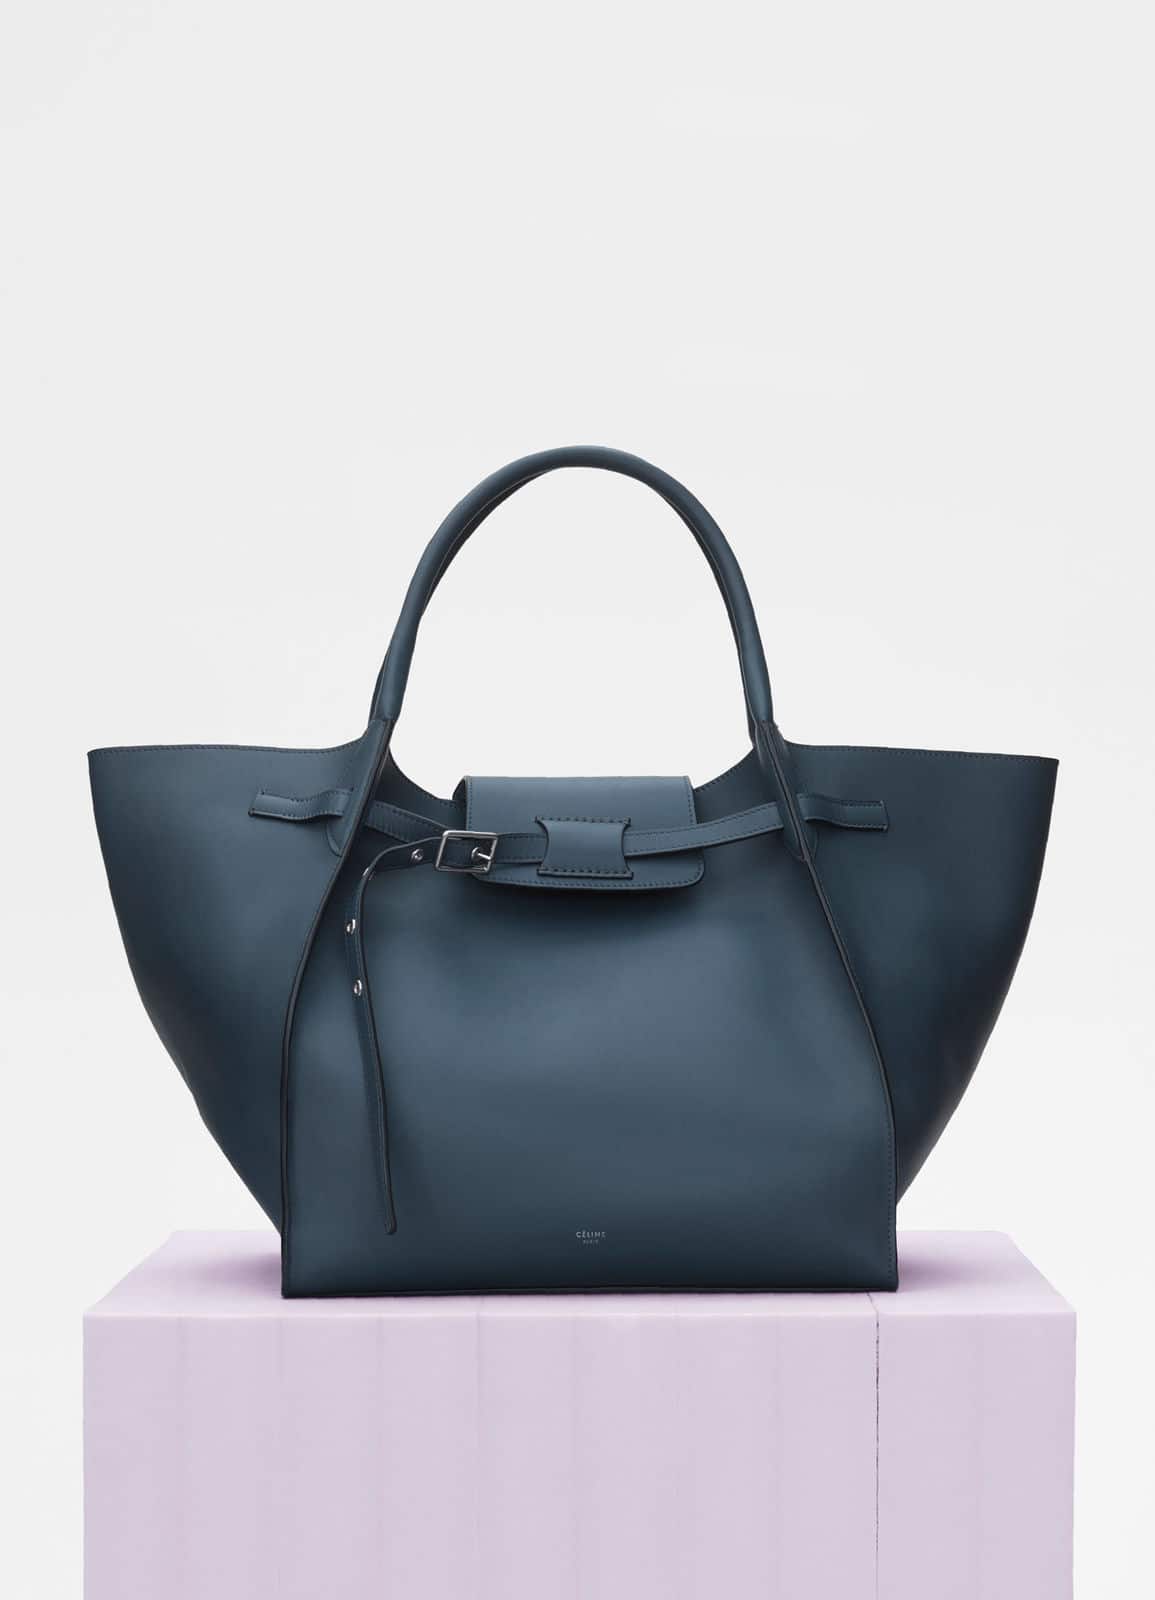 Celine Bag Price List Reference Guide - Spotted Fashion